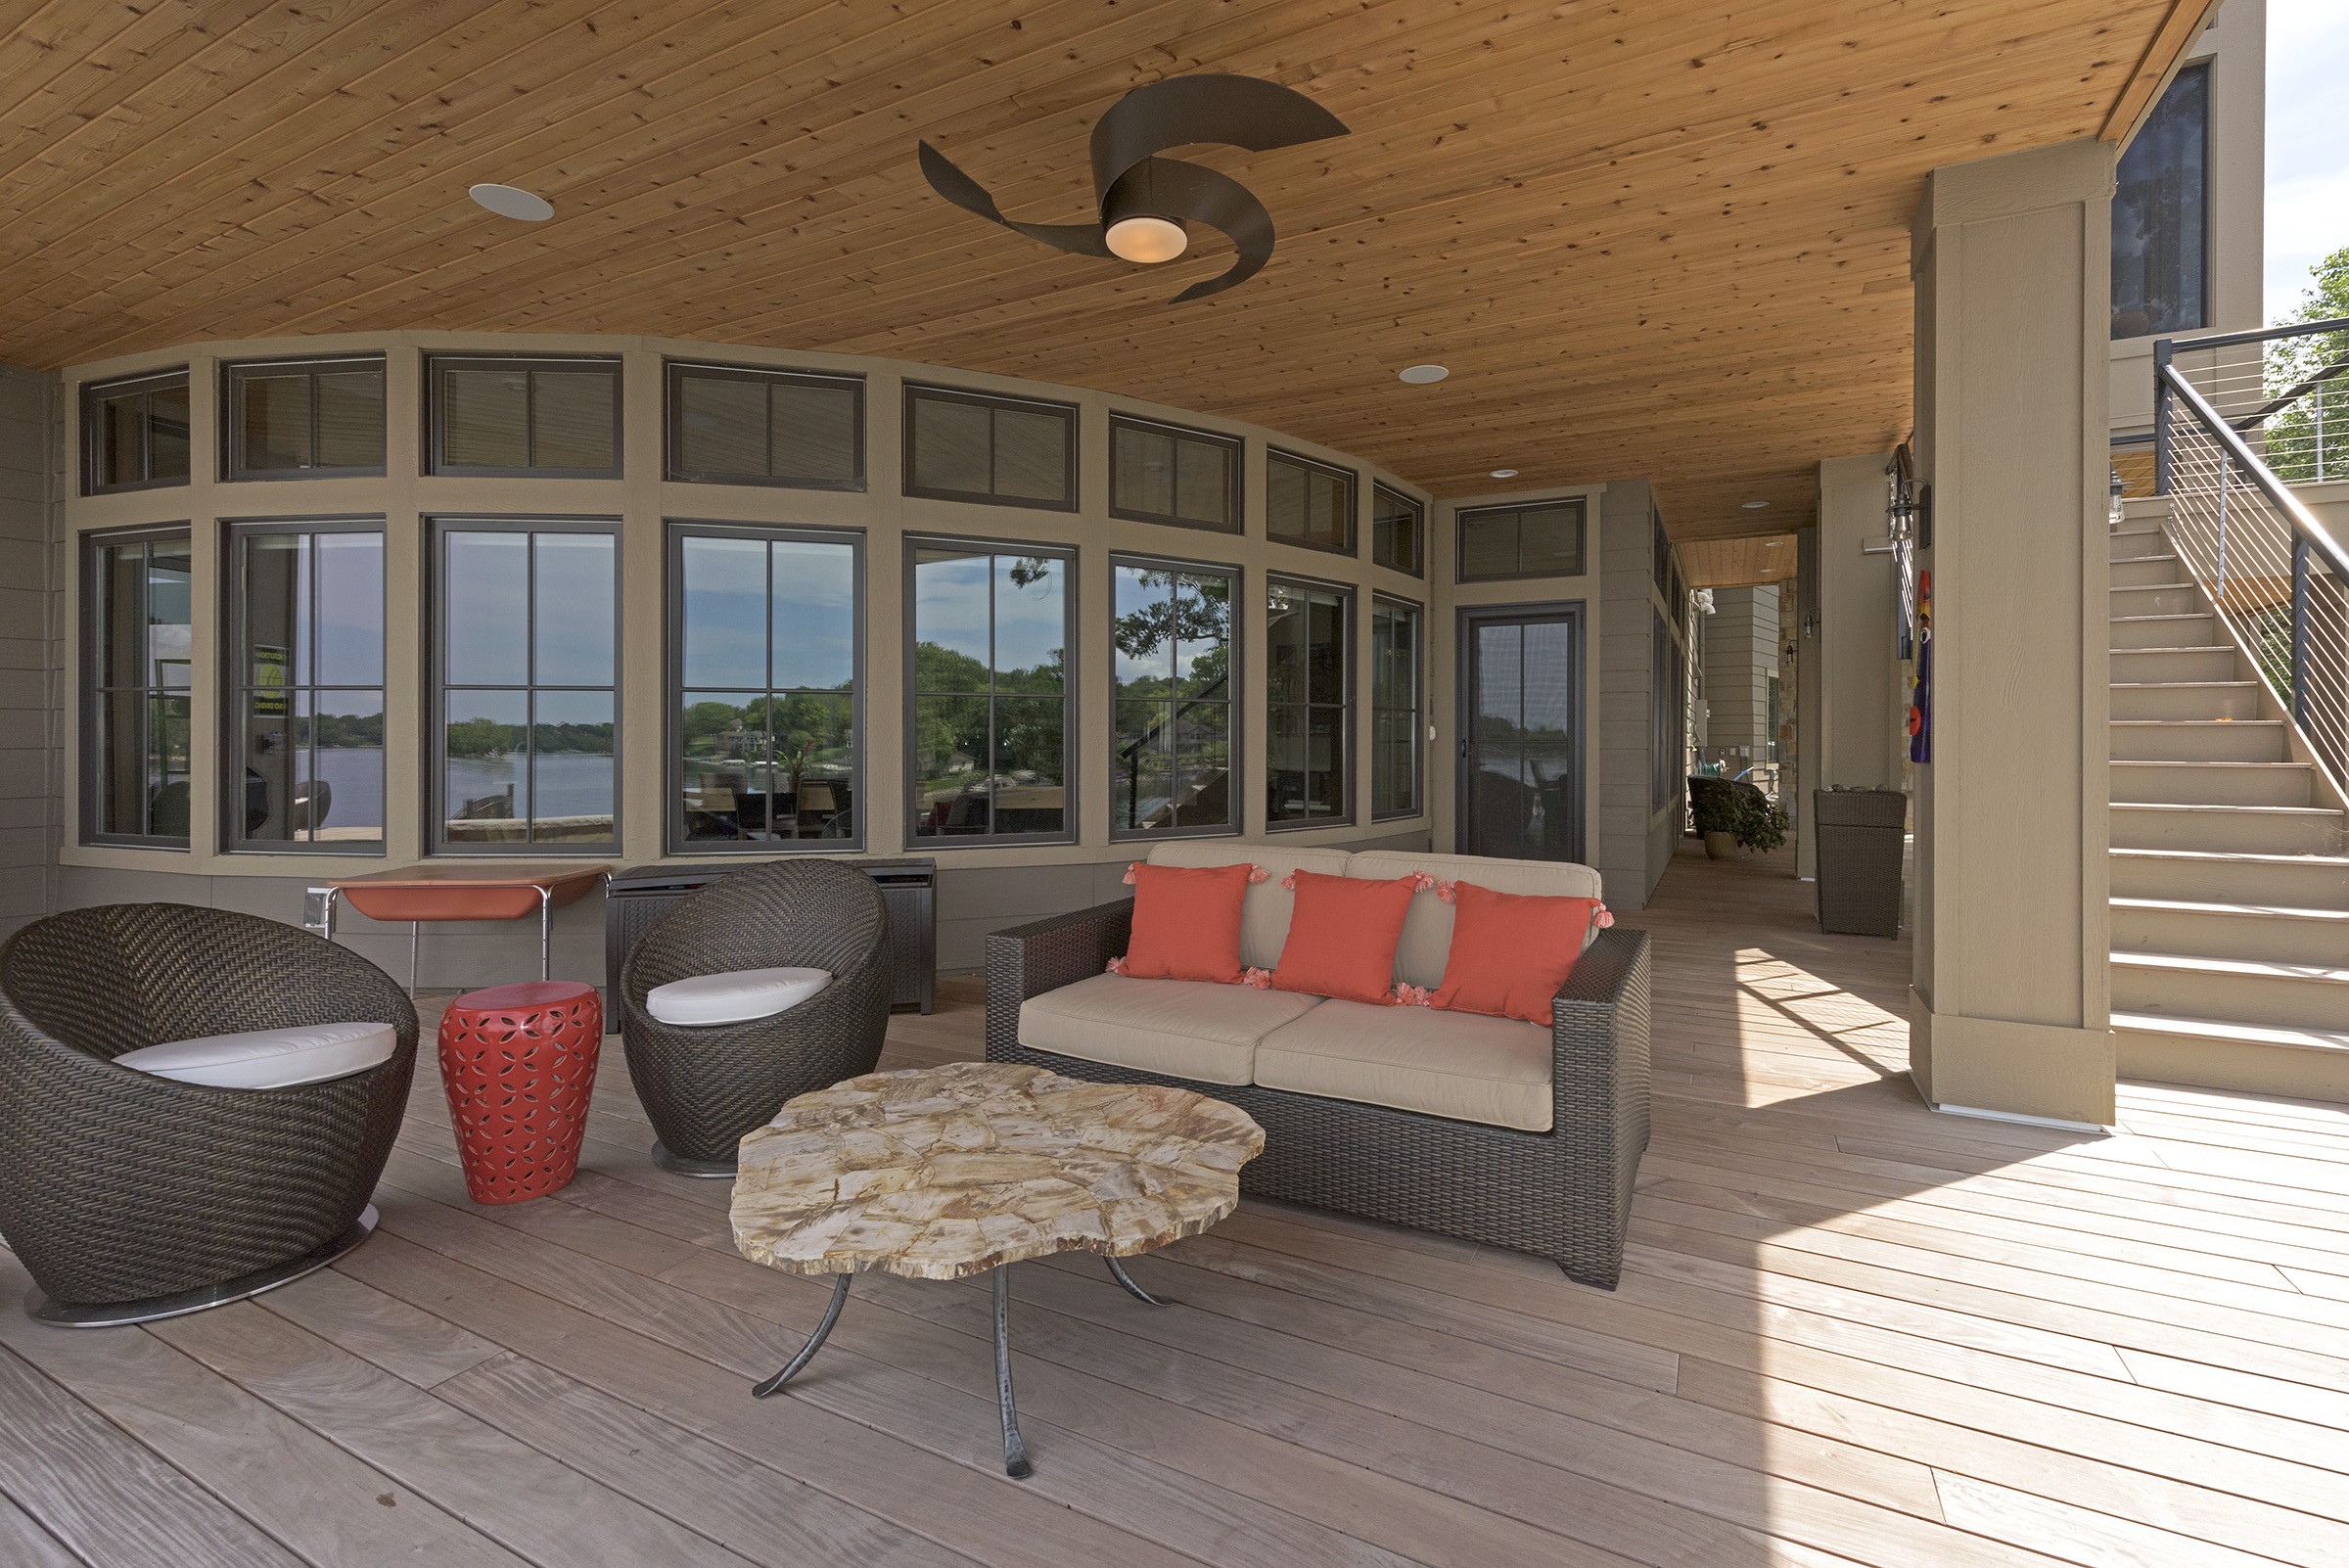 A deck with wicker furniture and a ceiling fan.